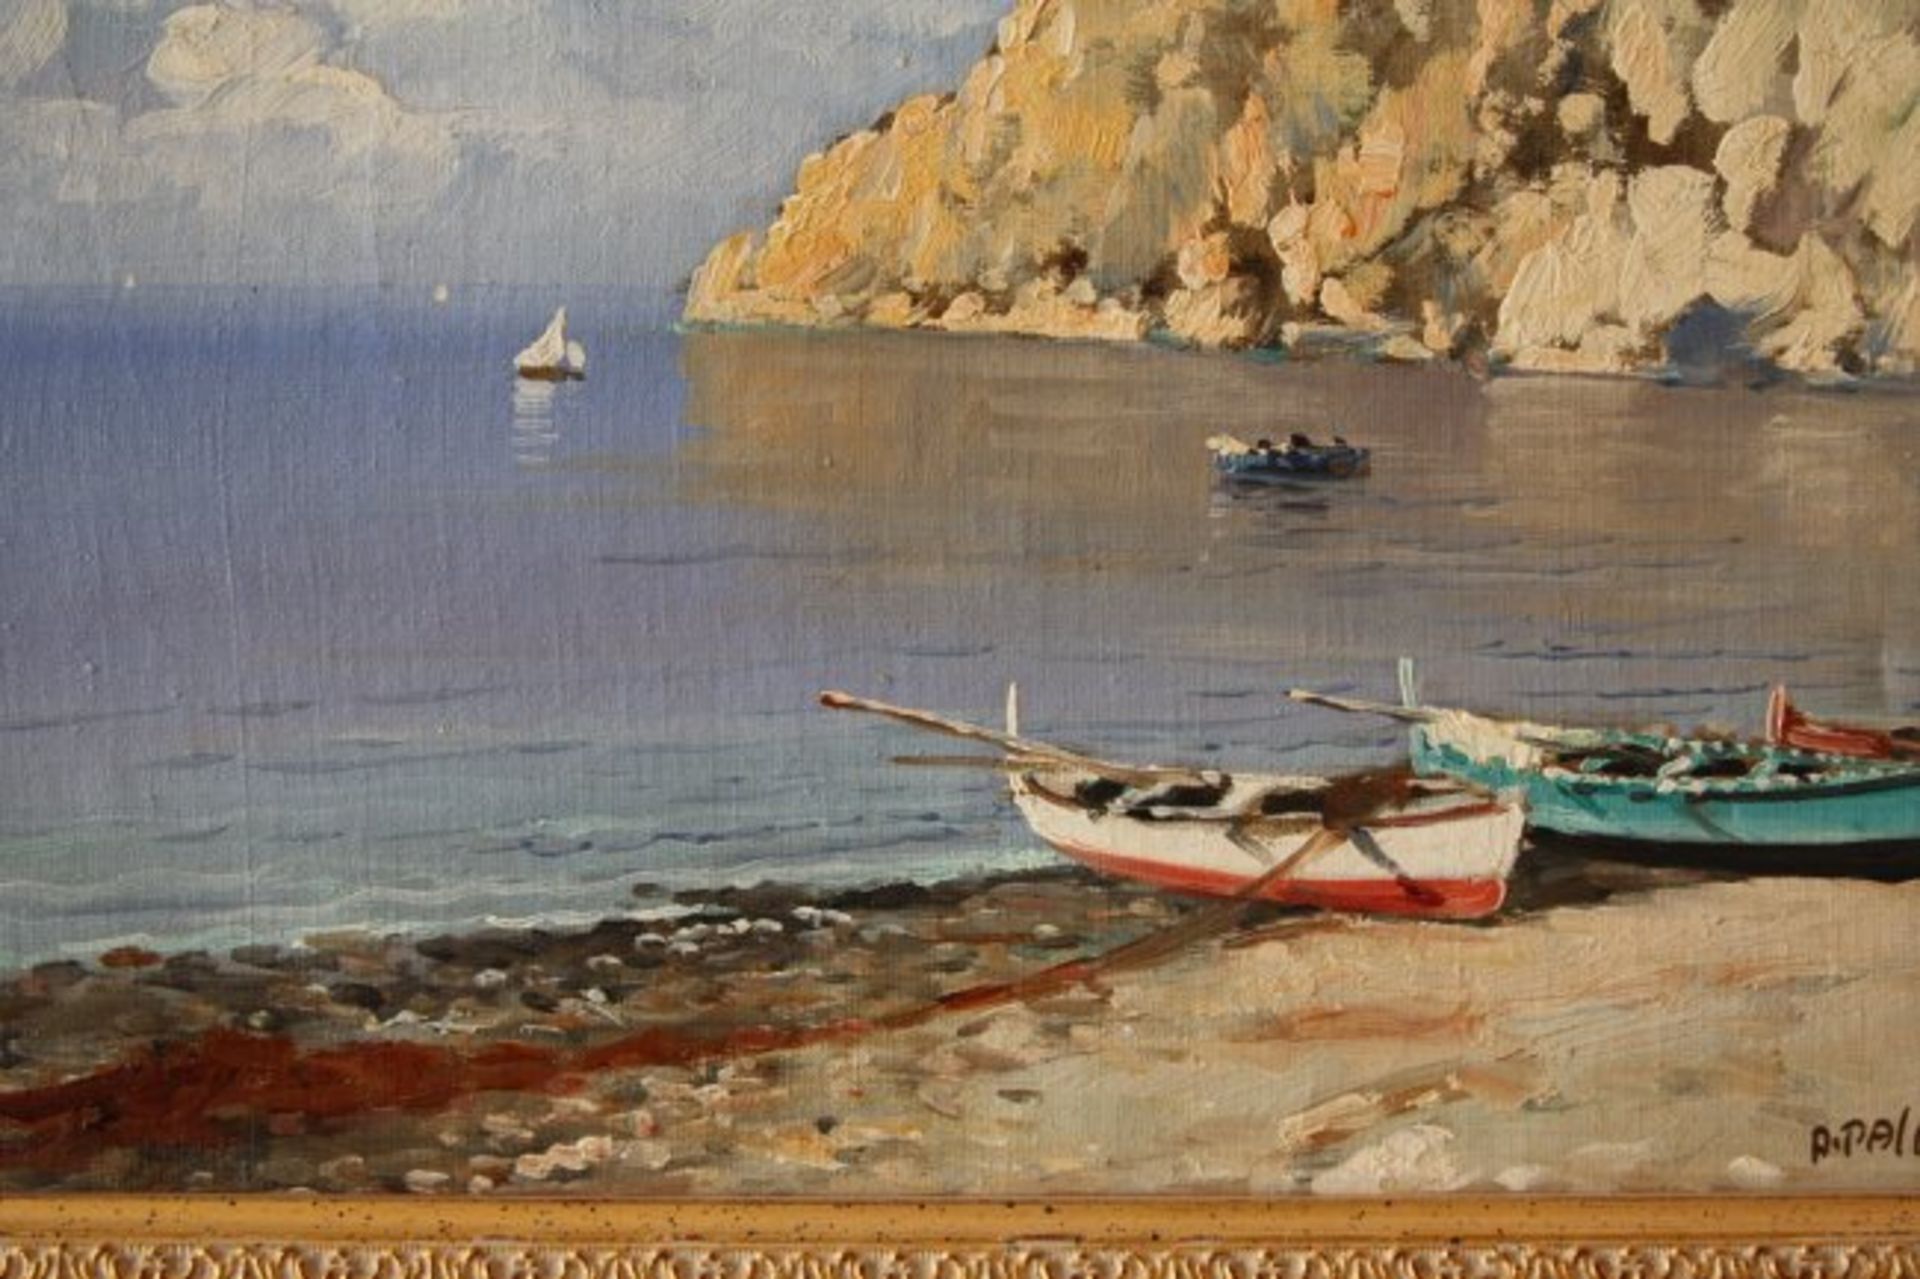 Painting of "Boat Bay" - Image 2 of 4